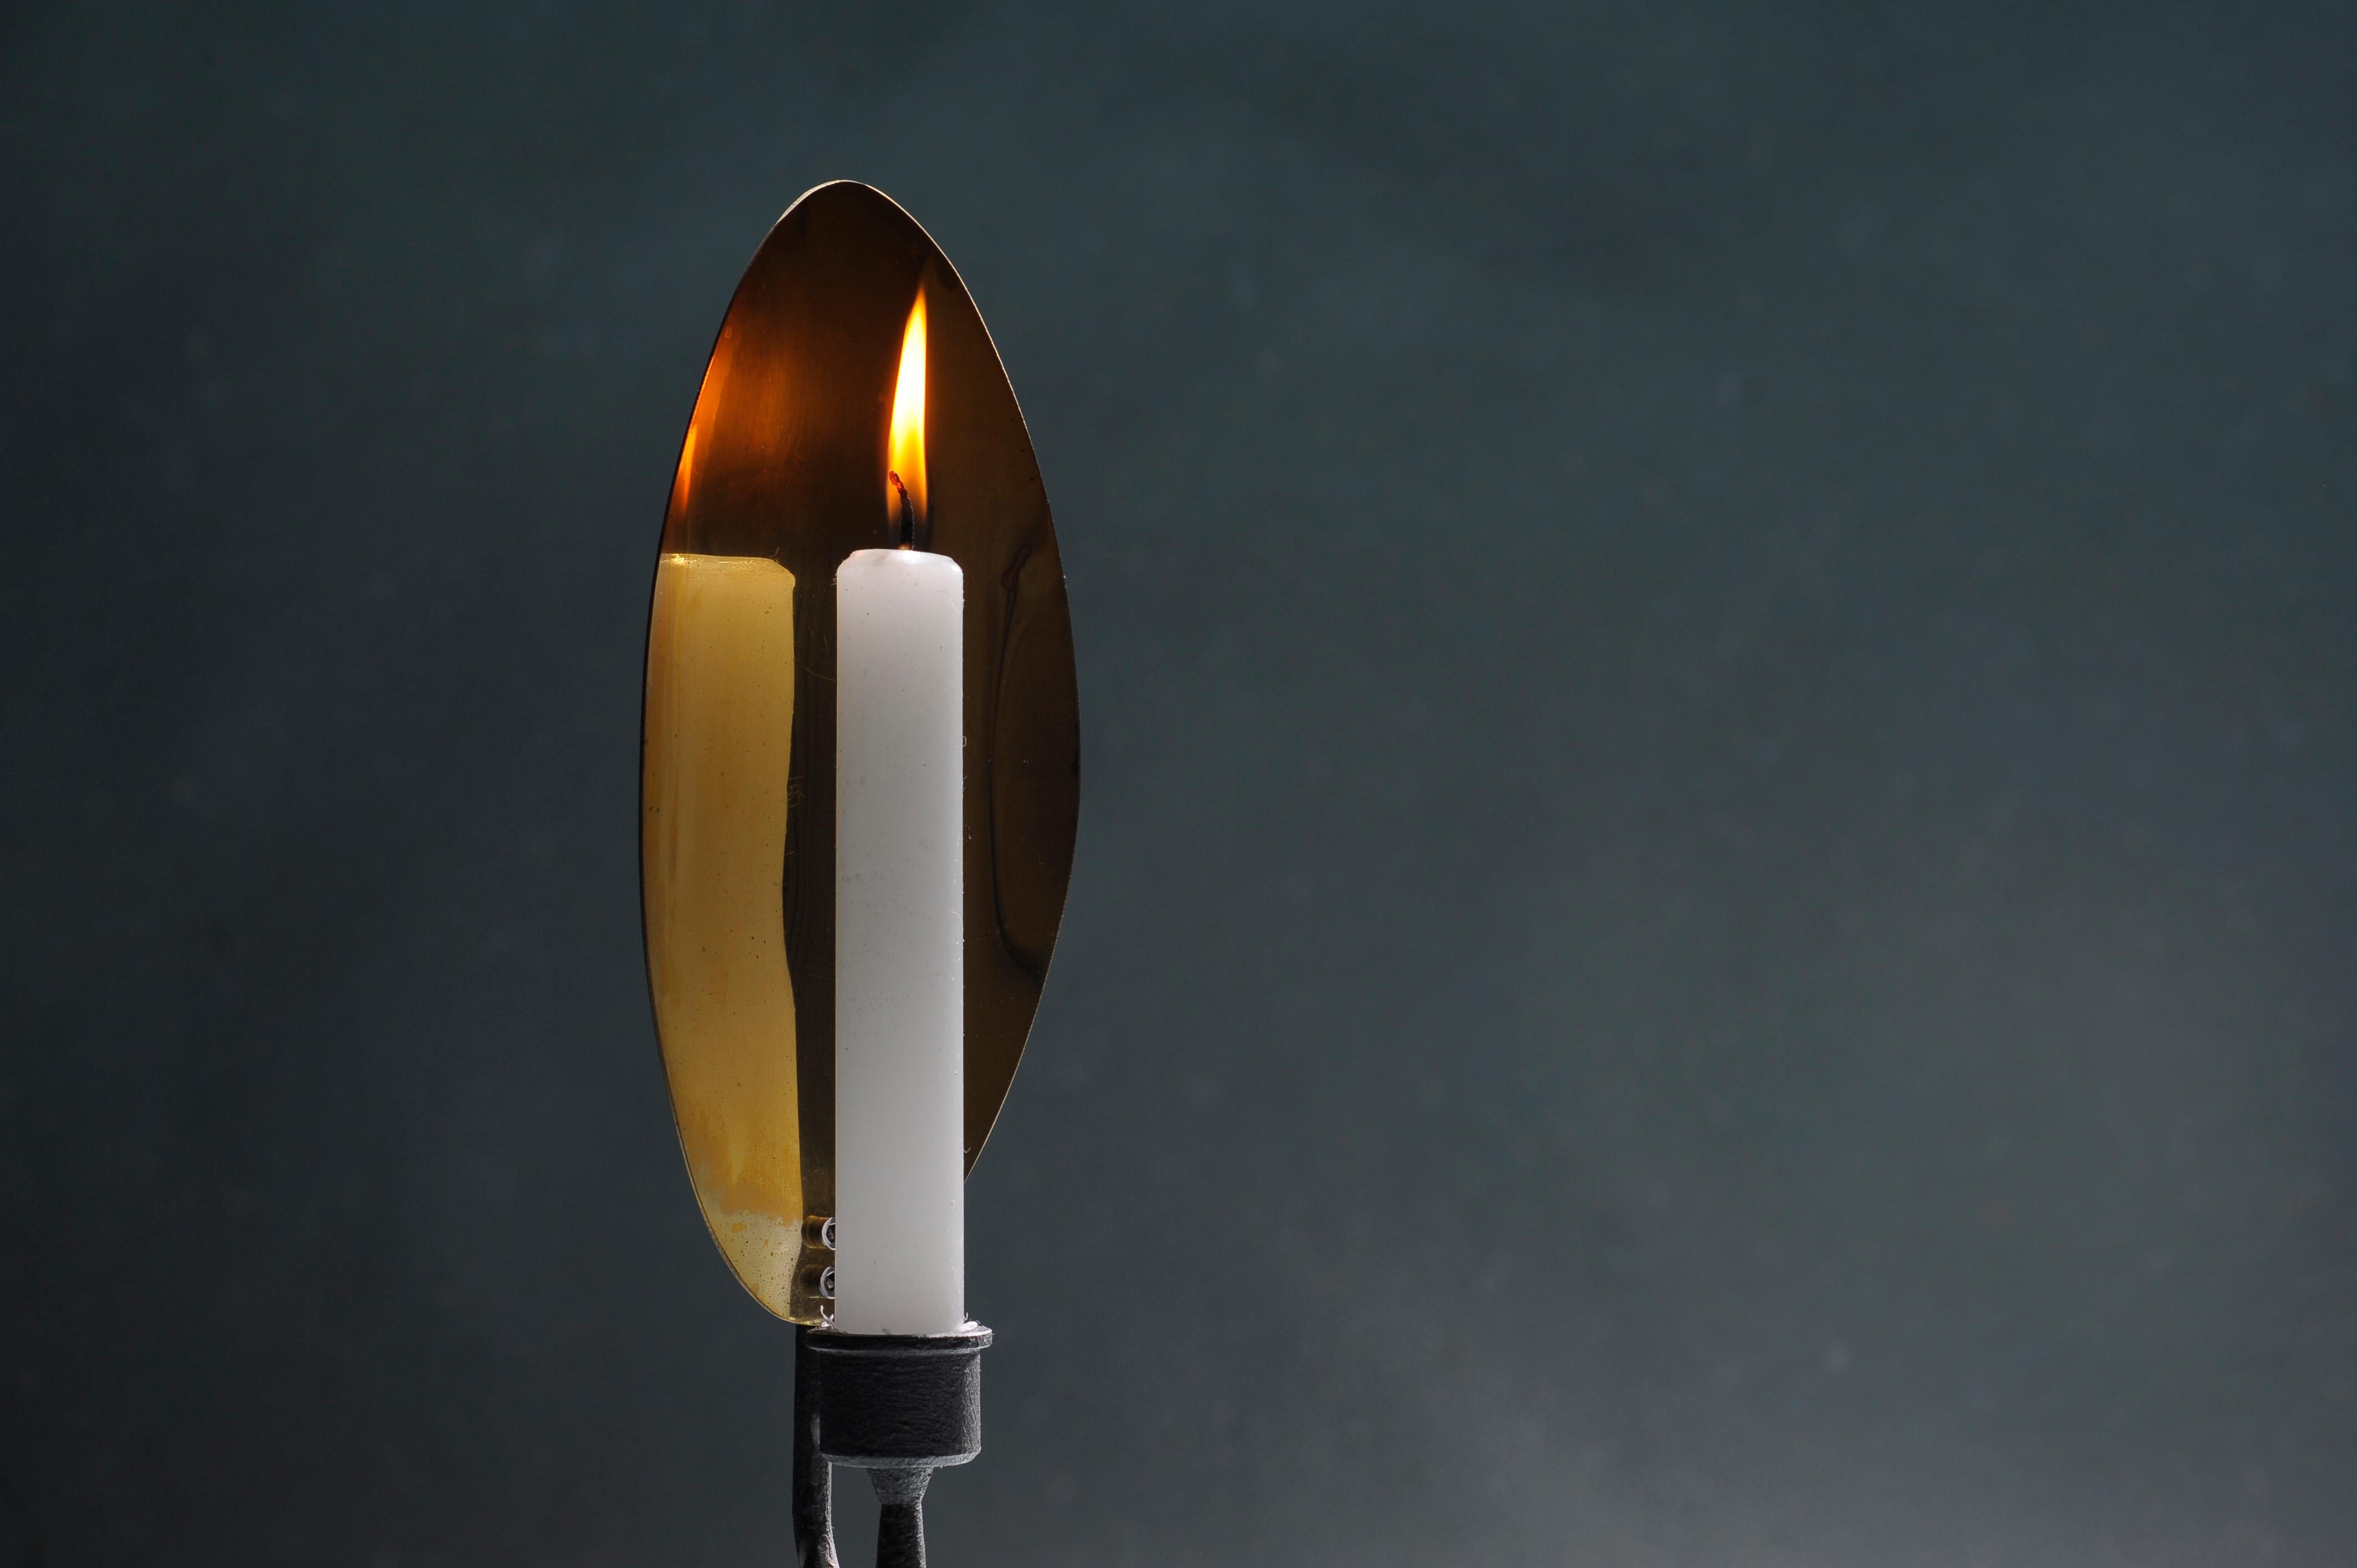 Unique sculpted steel candleholder “Feather” signed by Lukasz Friedrich.
Steel candleholder “Feather”
Dimensions: 35 x 8 x 8 cm.
Finish: steel with polished brass reflect.
Edition of 100.
Signed.